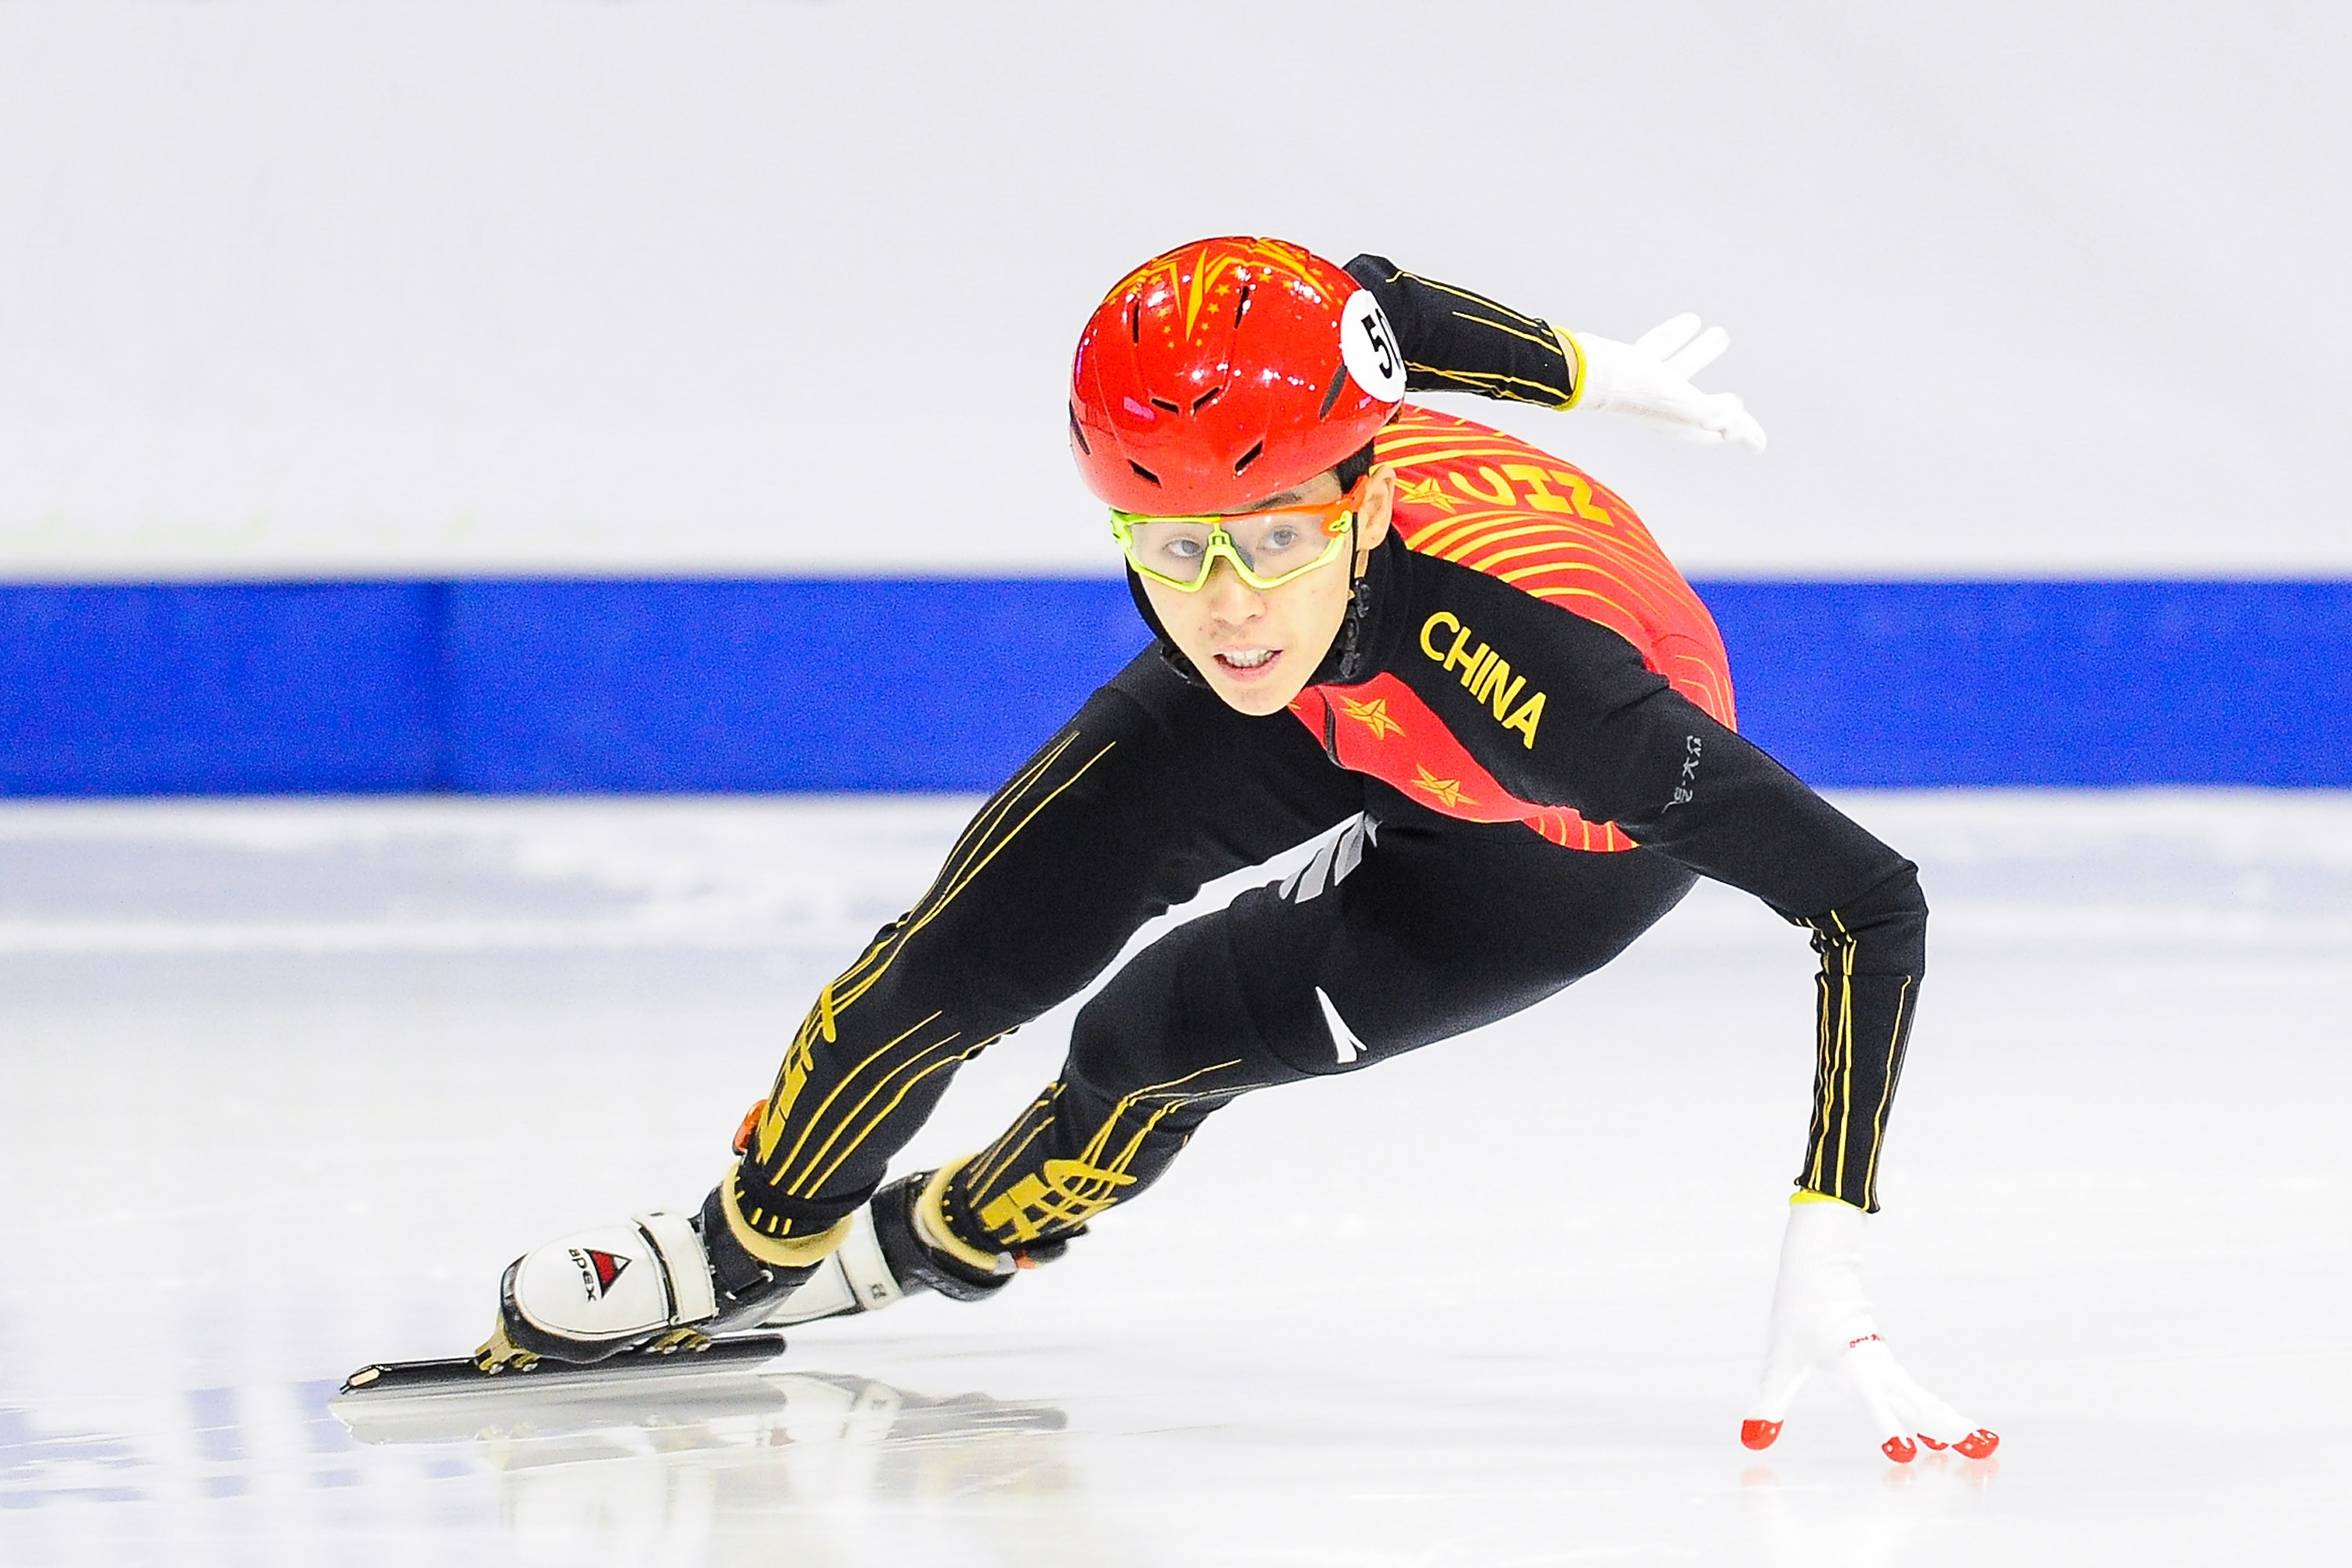 The Chinese speed skater Fan Kexin won 2 medals at Beijing